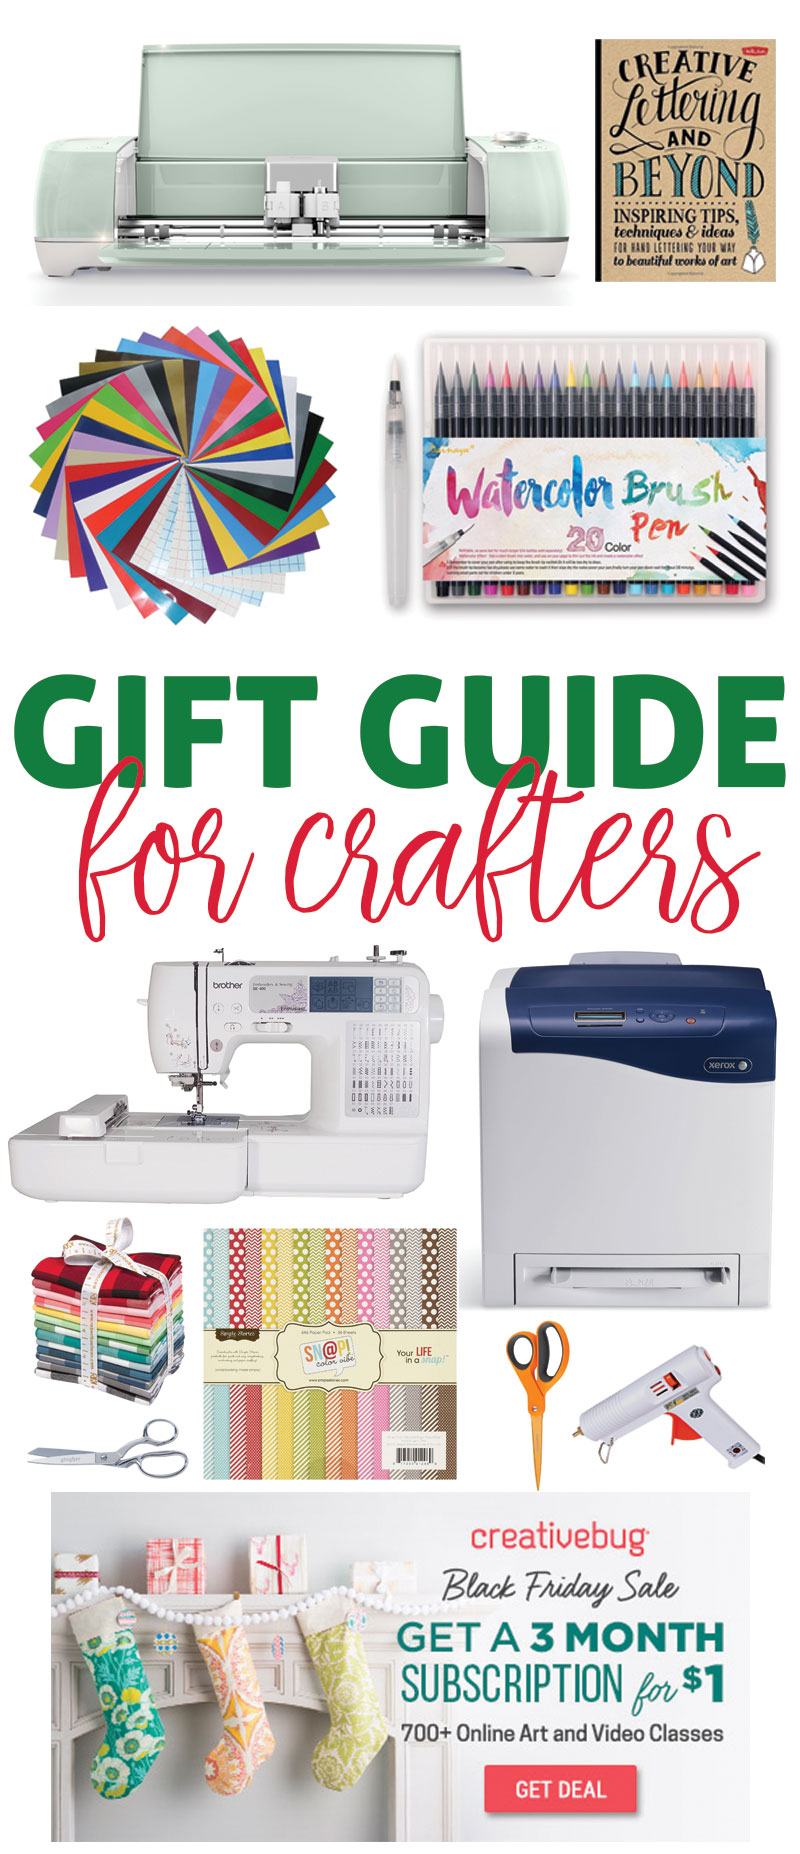 The 12 Best Gift Ideas for Crafters by Lindi Haws of Love The Day